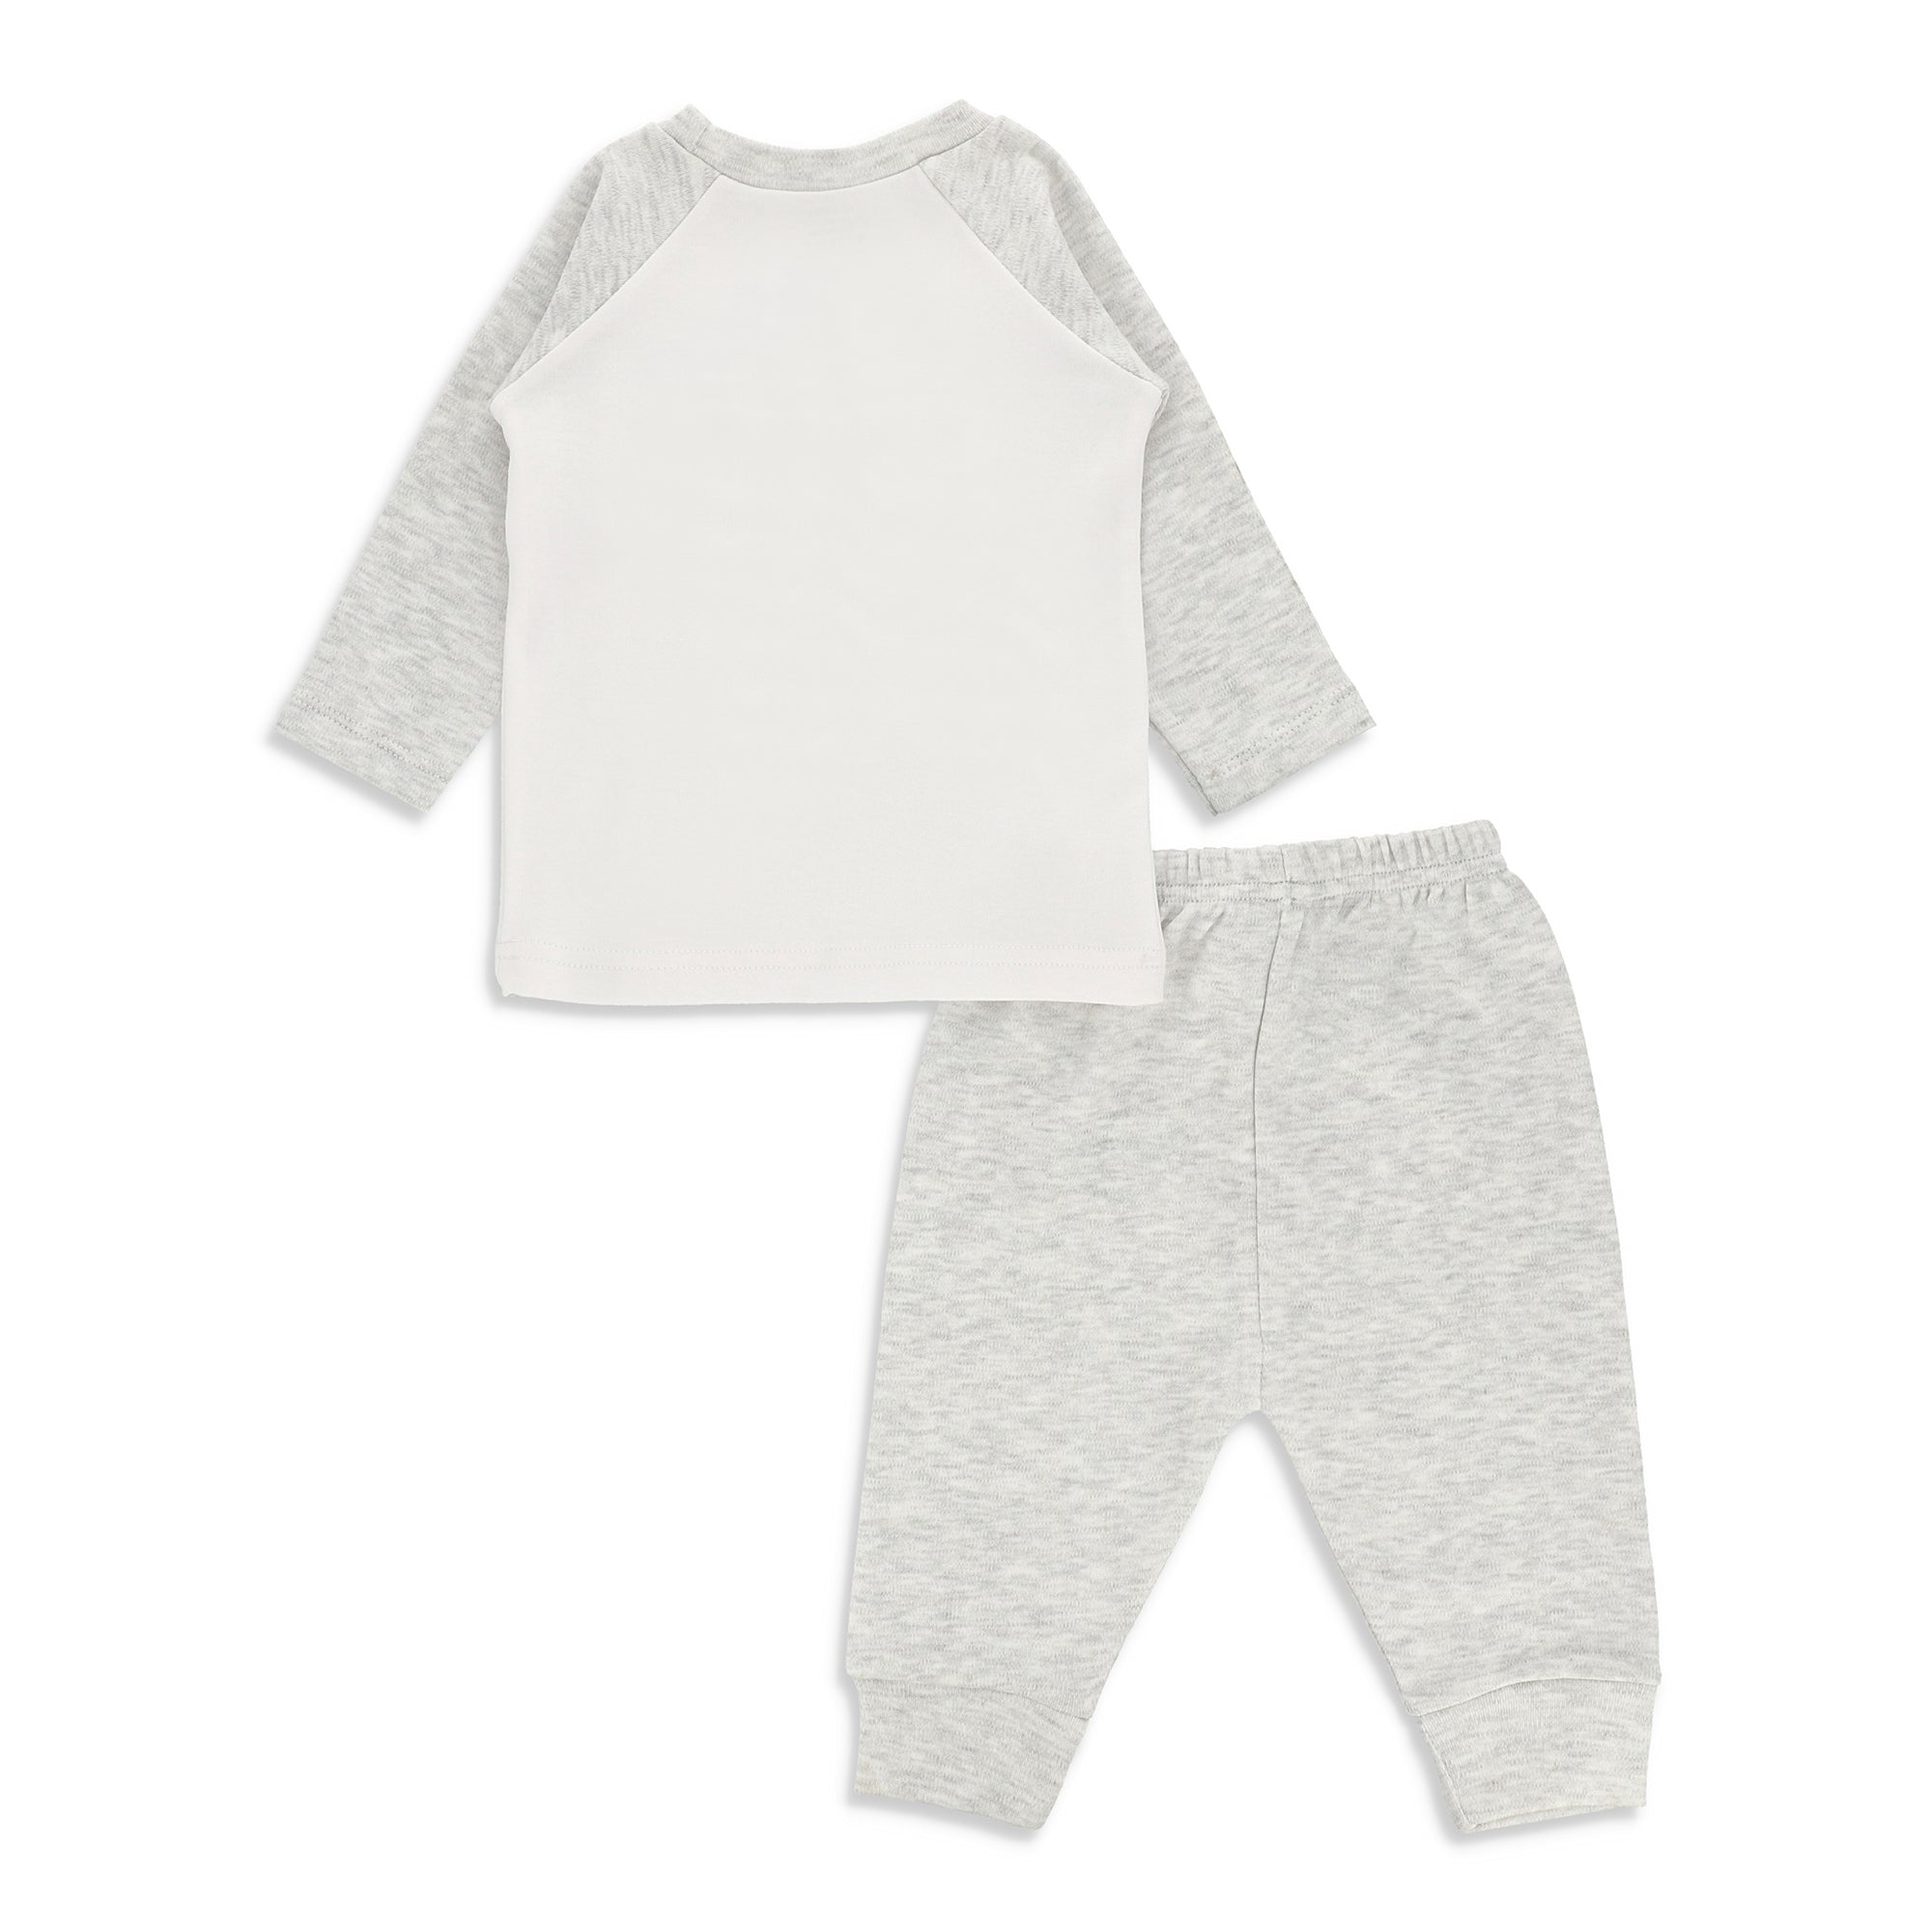 FB-3002 White Awesome All The Time Shirt & Grey Alloy Pants - Featherhead Baby